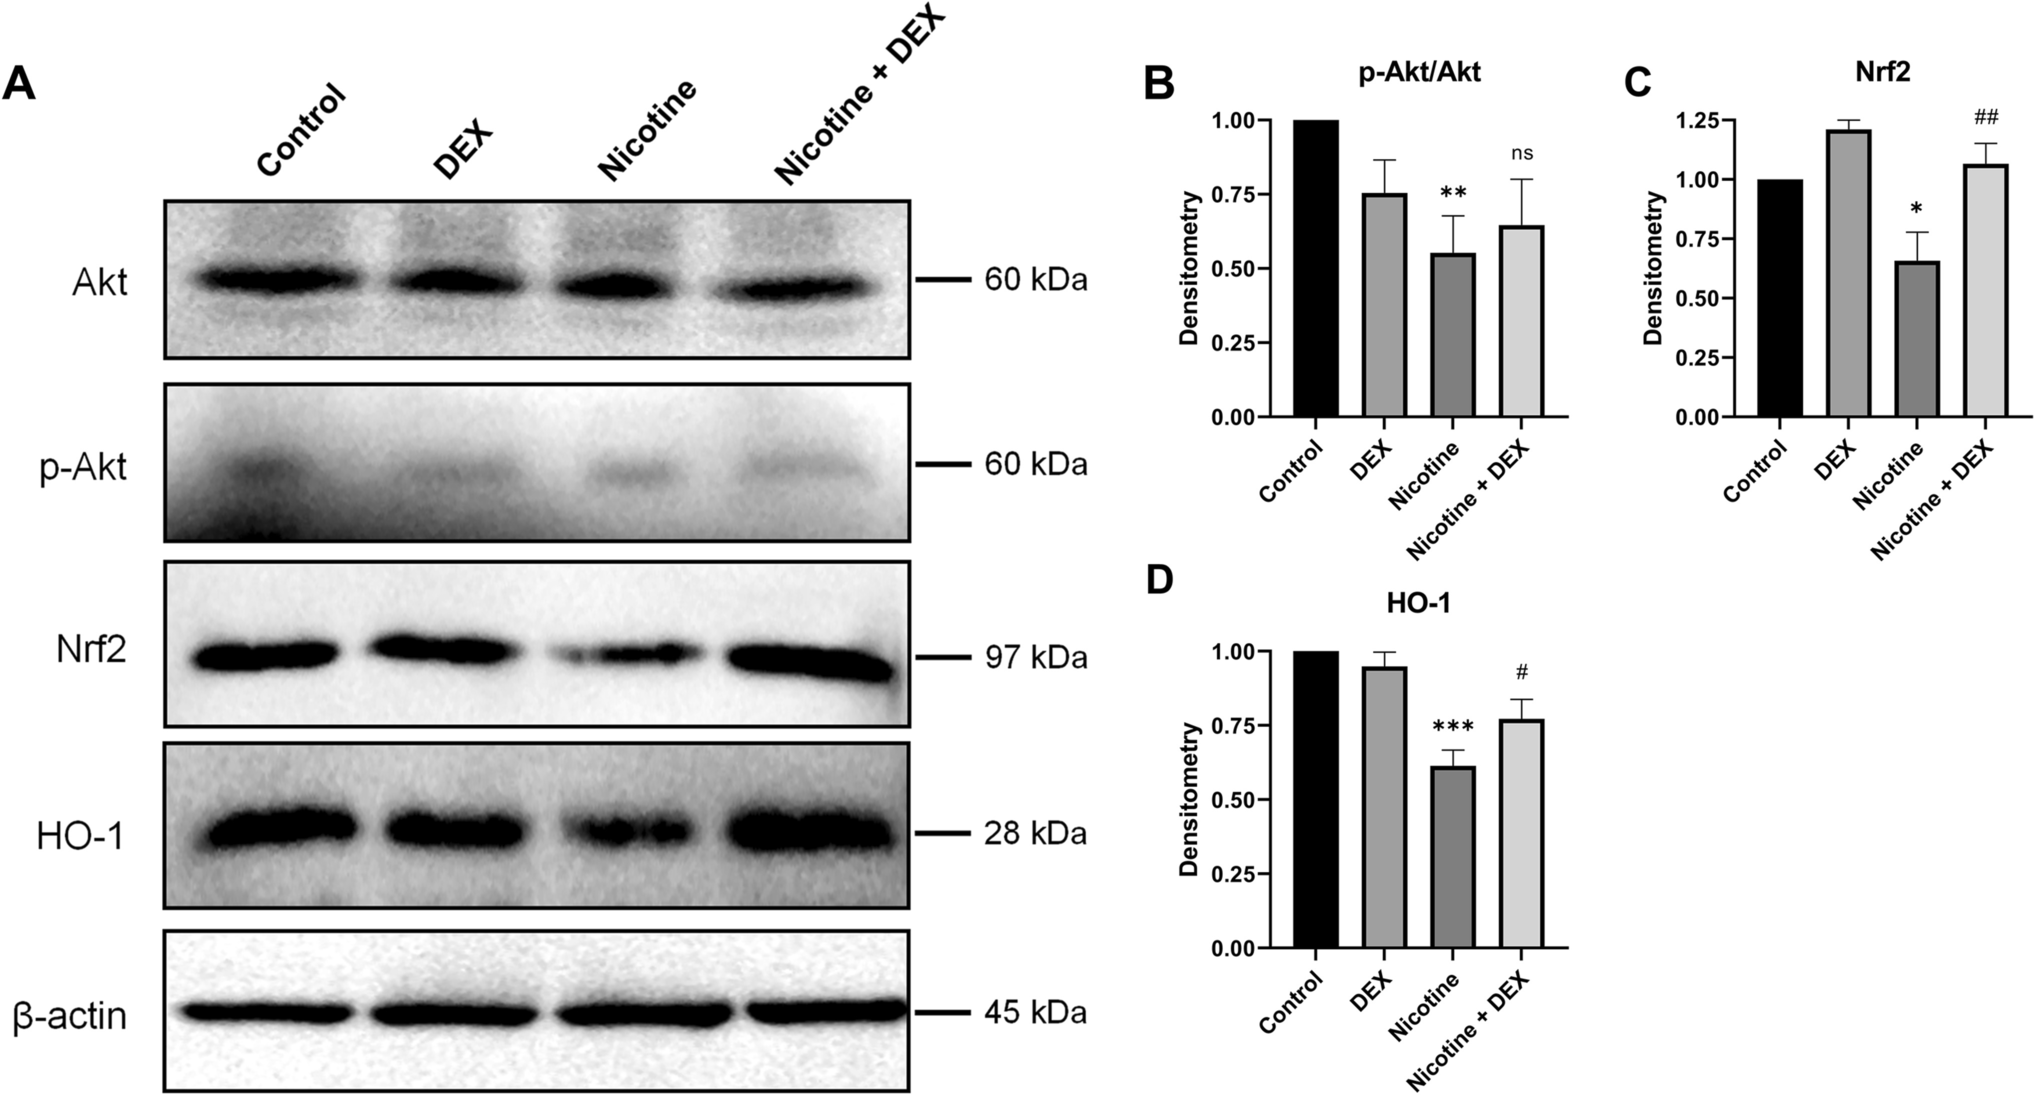 Dexpanthenol protects against nicotine-induced kidney injury by reducing oxidative stress and apoptosis through activation of the AKT/Nrf2/HO-1 pathway